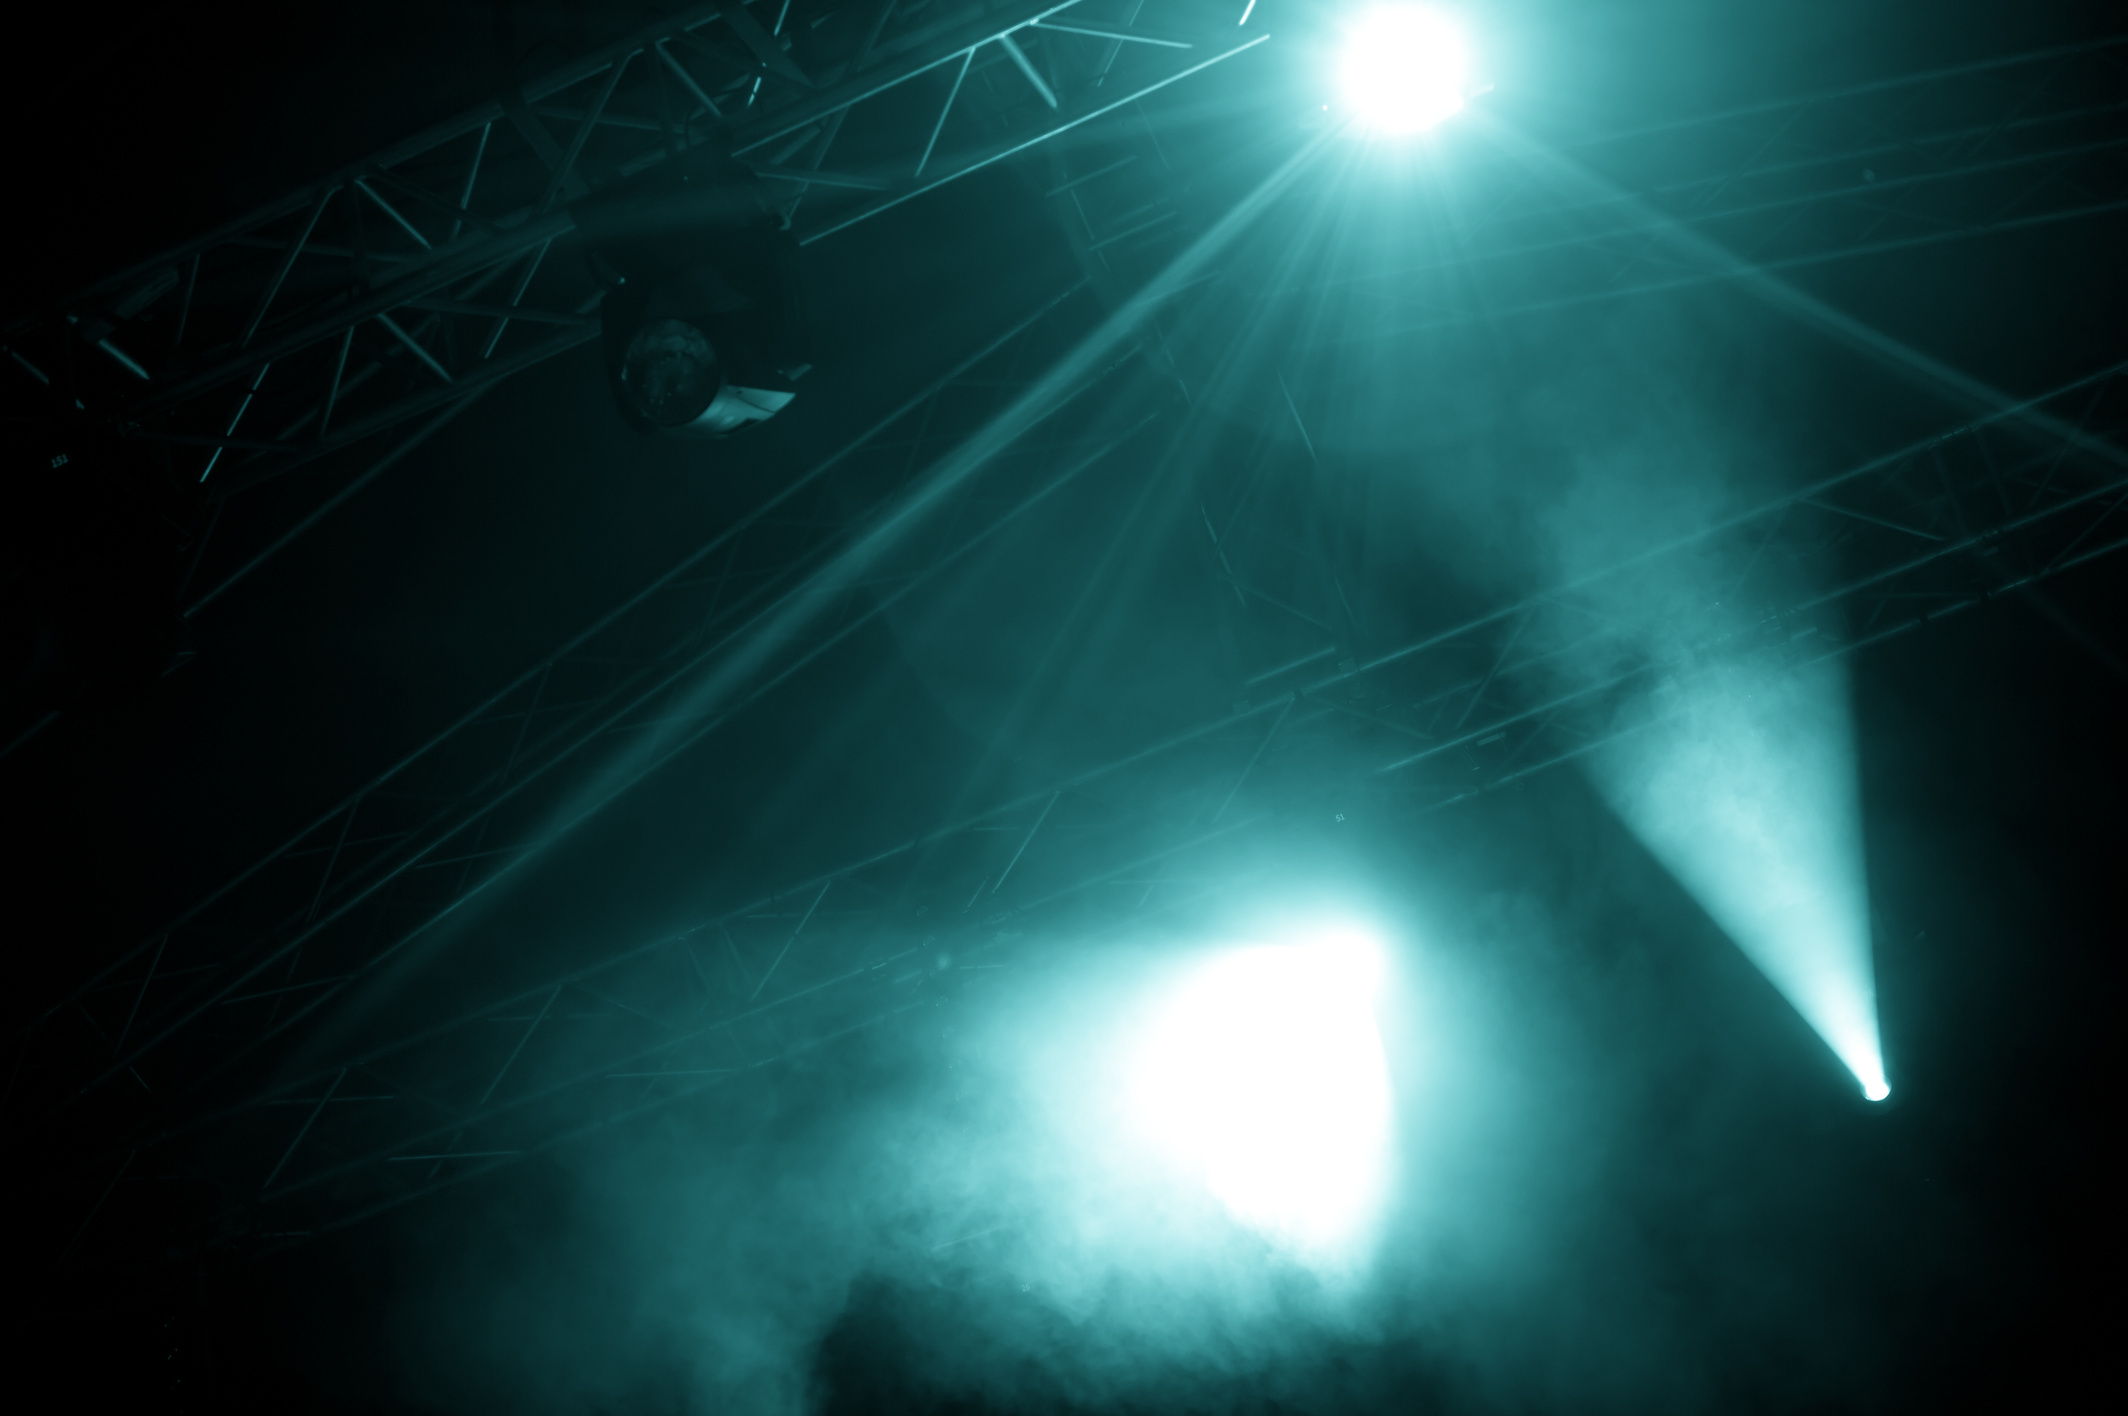 A view of foggy stage lights emerging from the dark